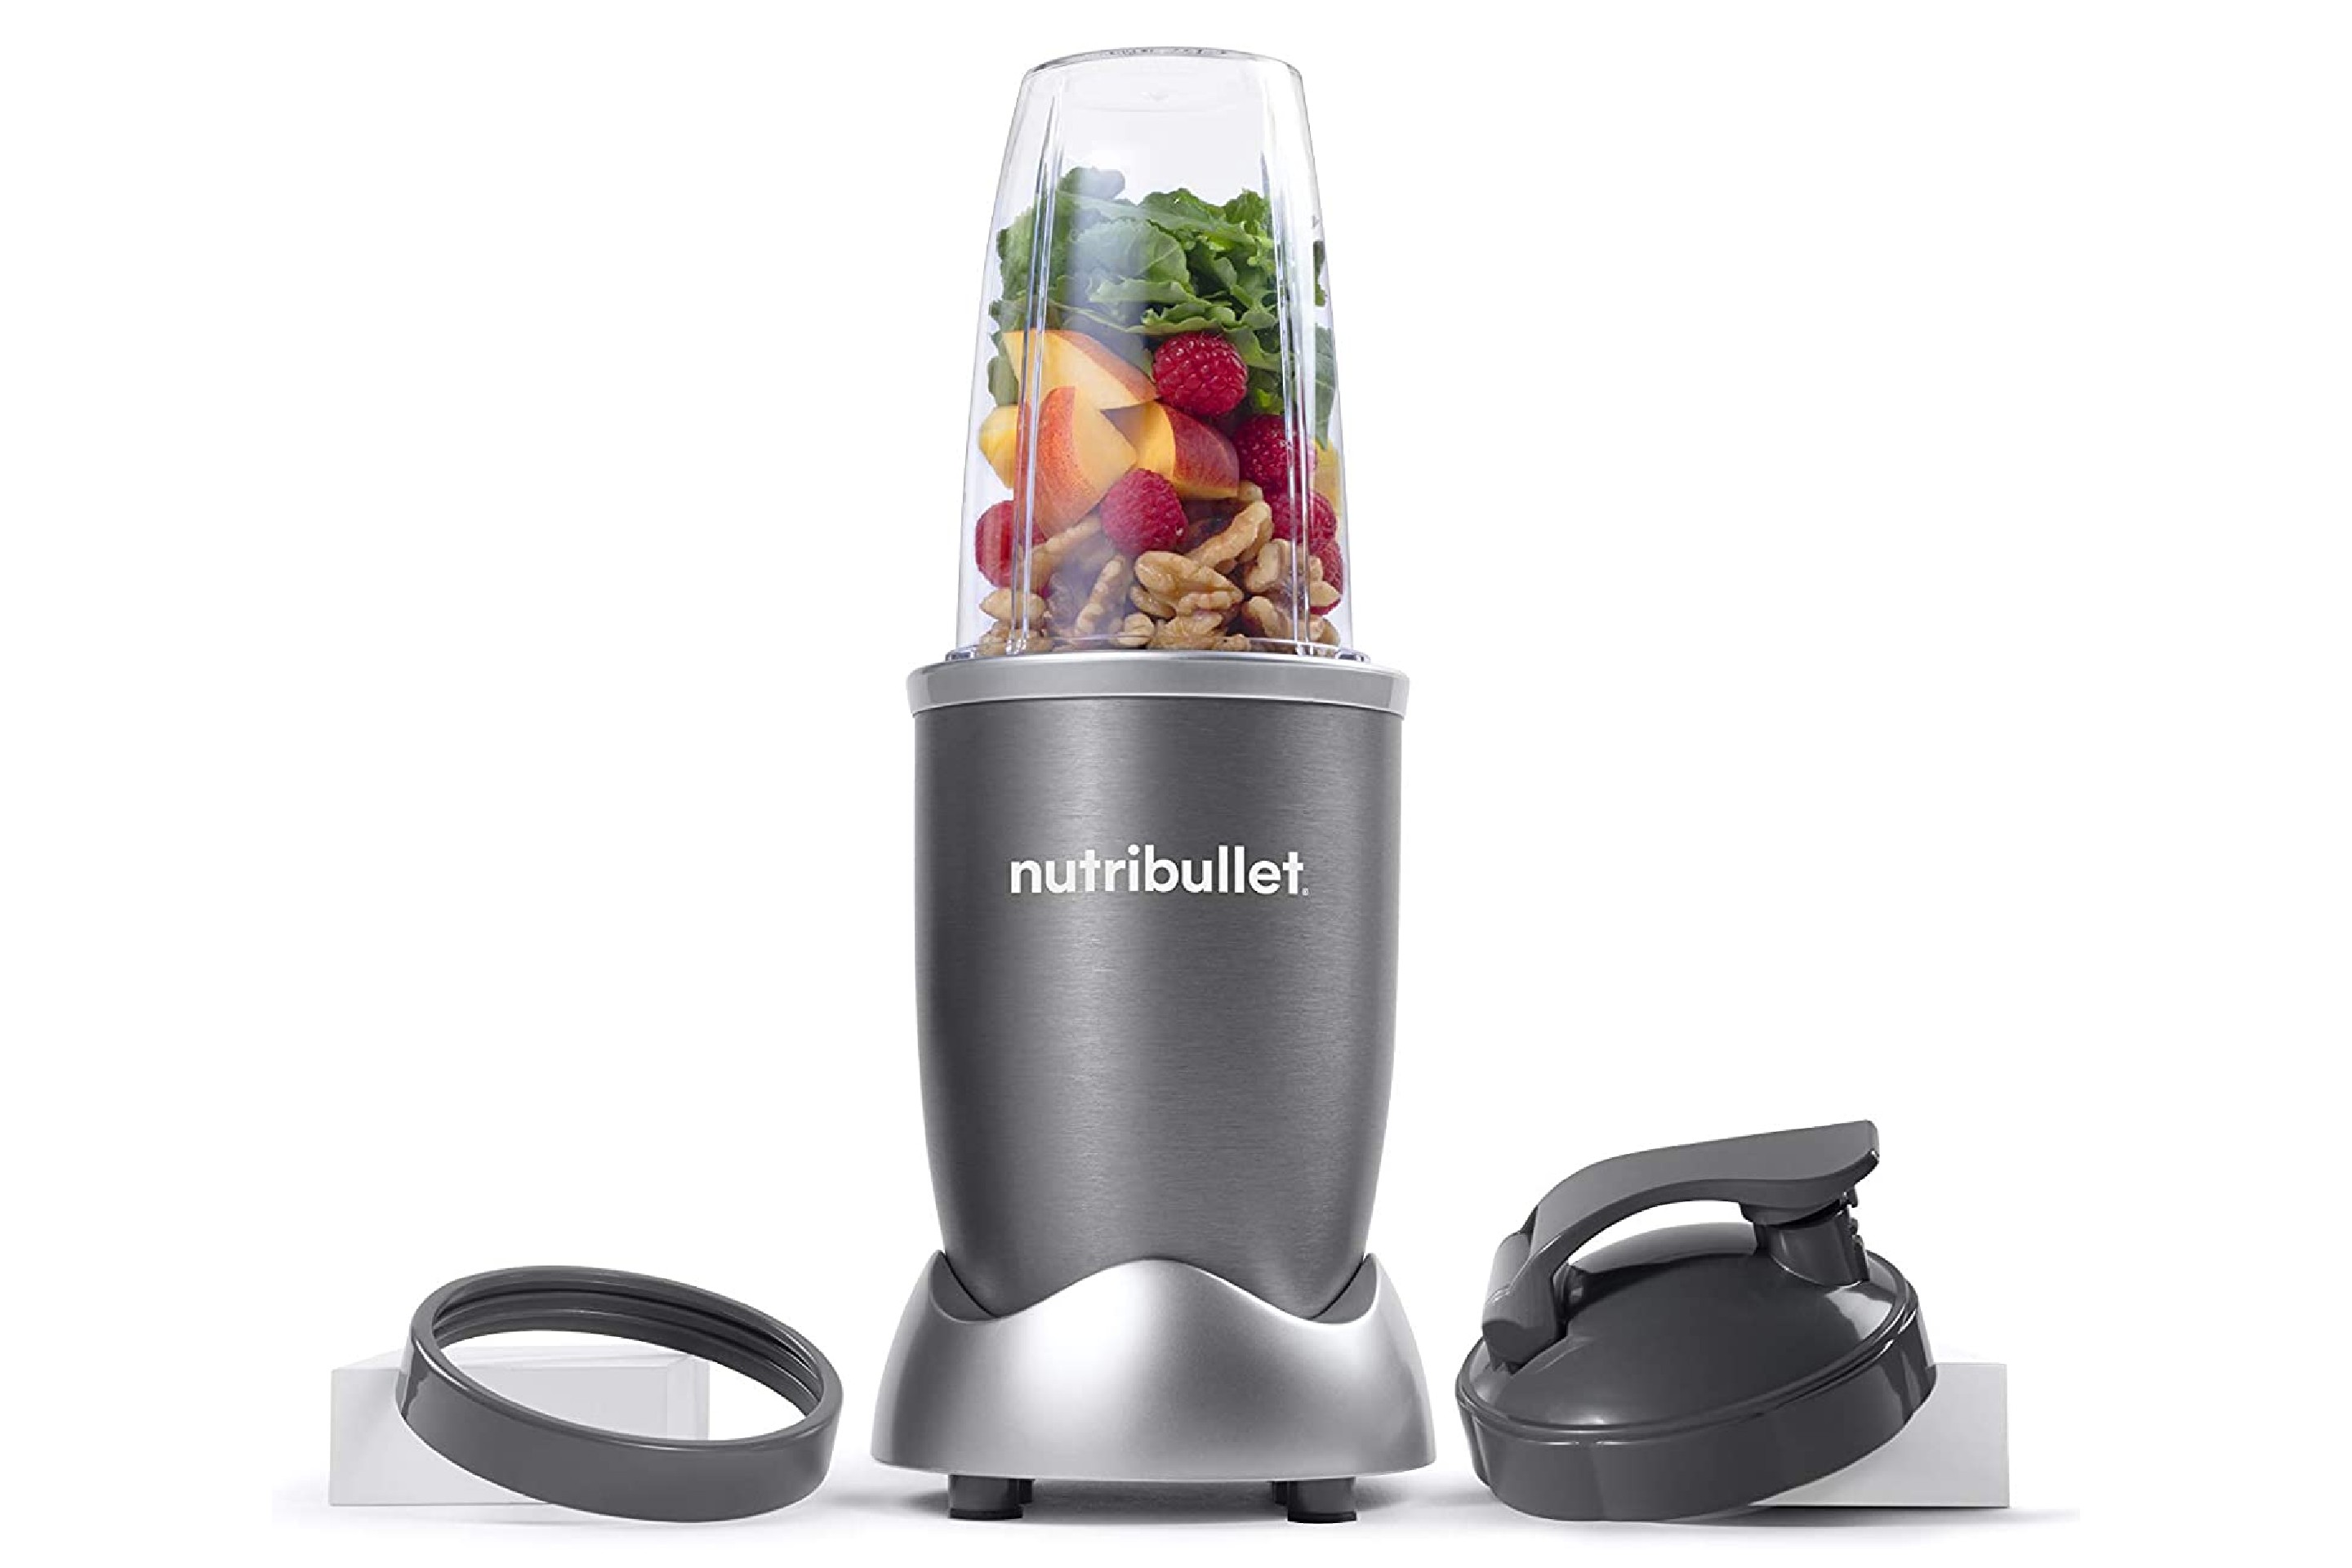 Blend like a Pro: The Top 05 Best Blenders for Nuts and Seeds 